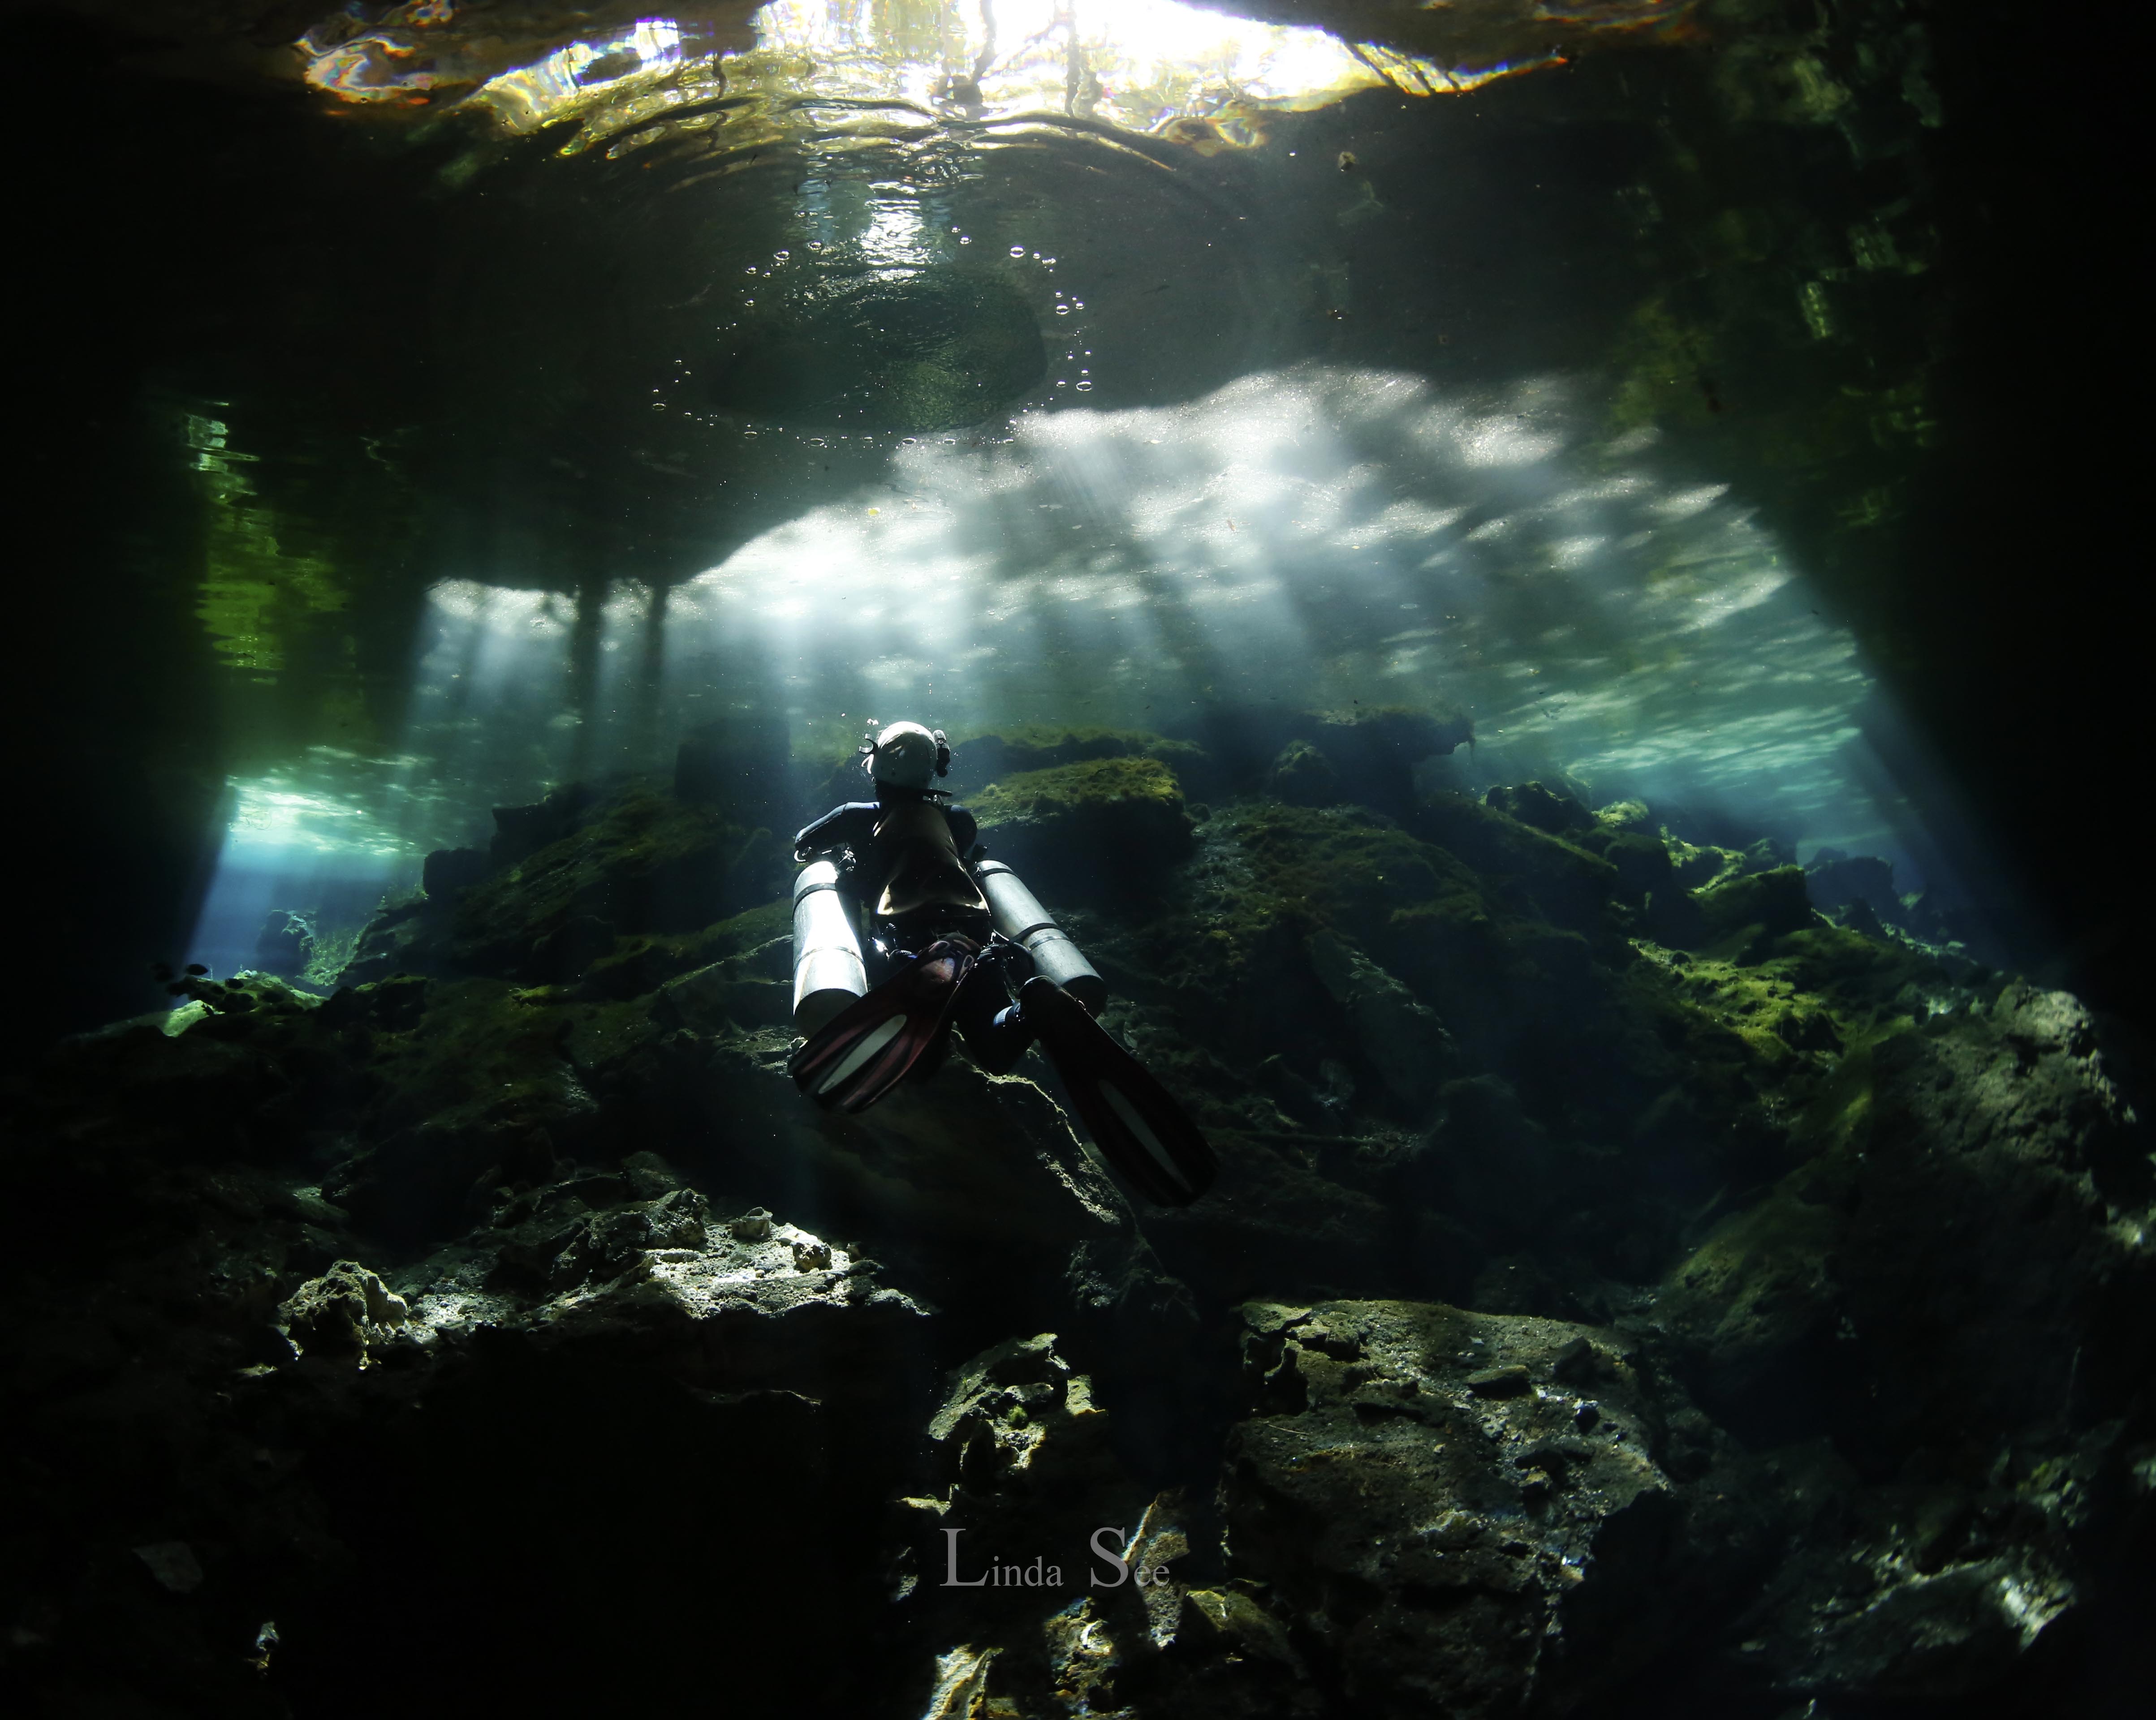 Cenote Photos, Linda See Photography, Cenote Diving Chemuyil. Cavern Diving Chemuyil